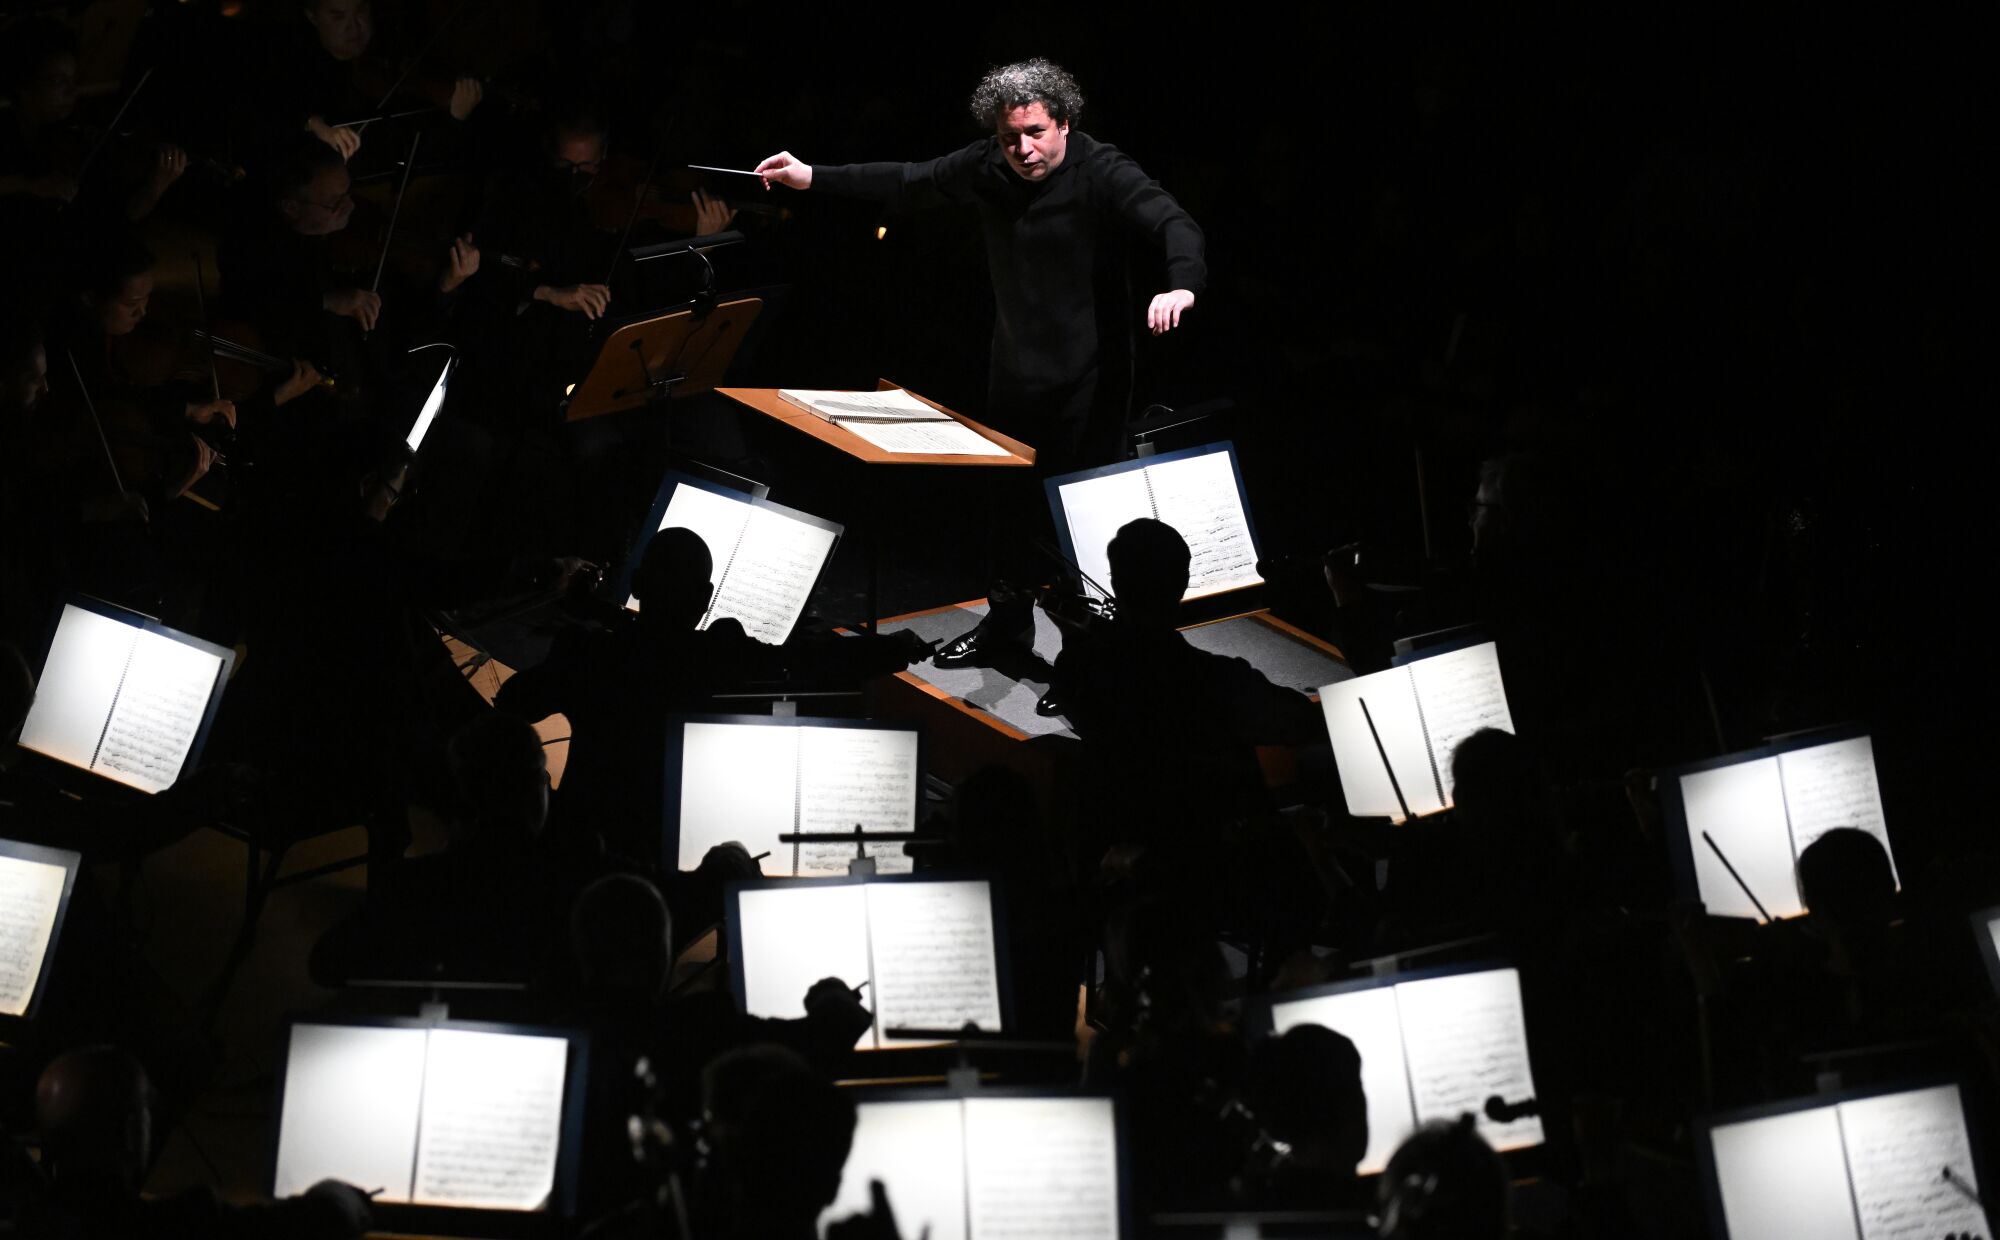 Seen in upper part of the frame against black background, Gustavo Dudamel directs the orchestra below.